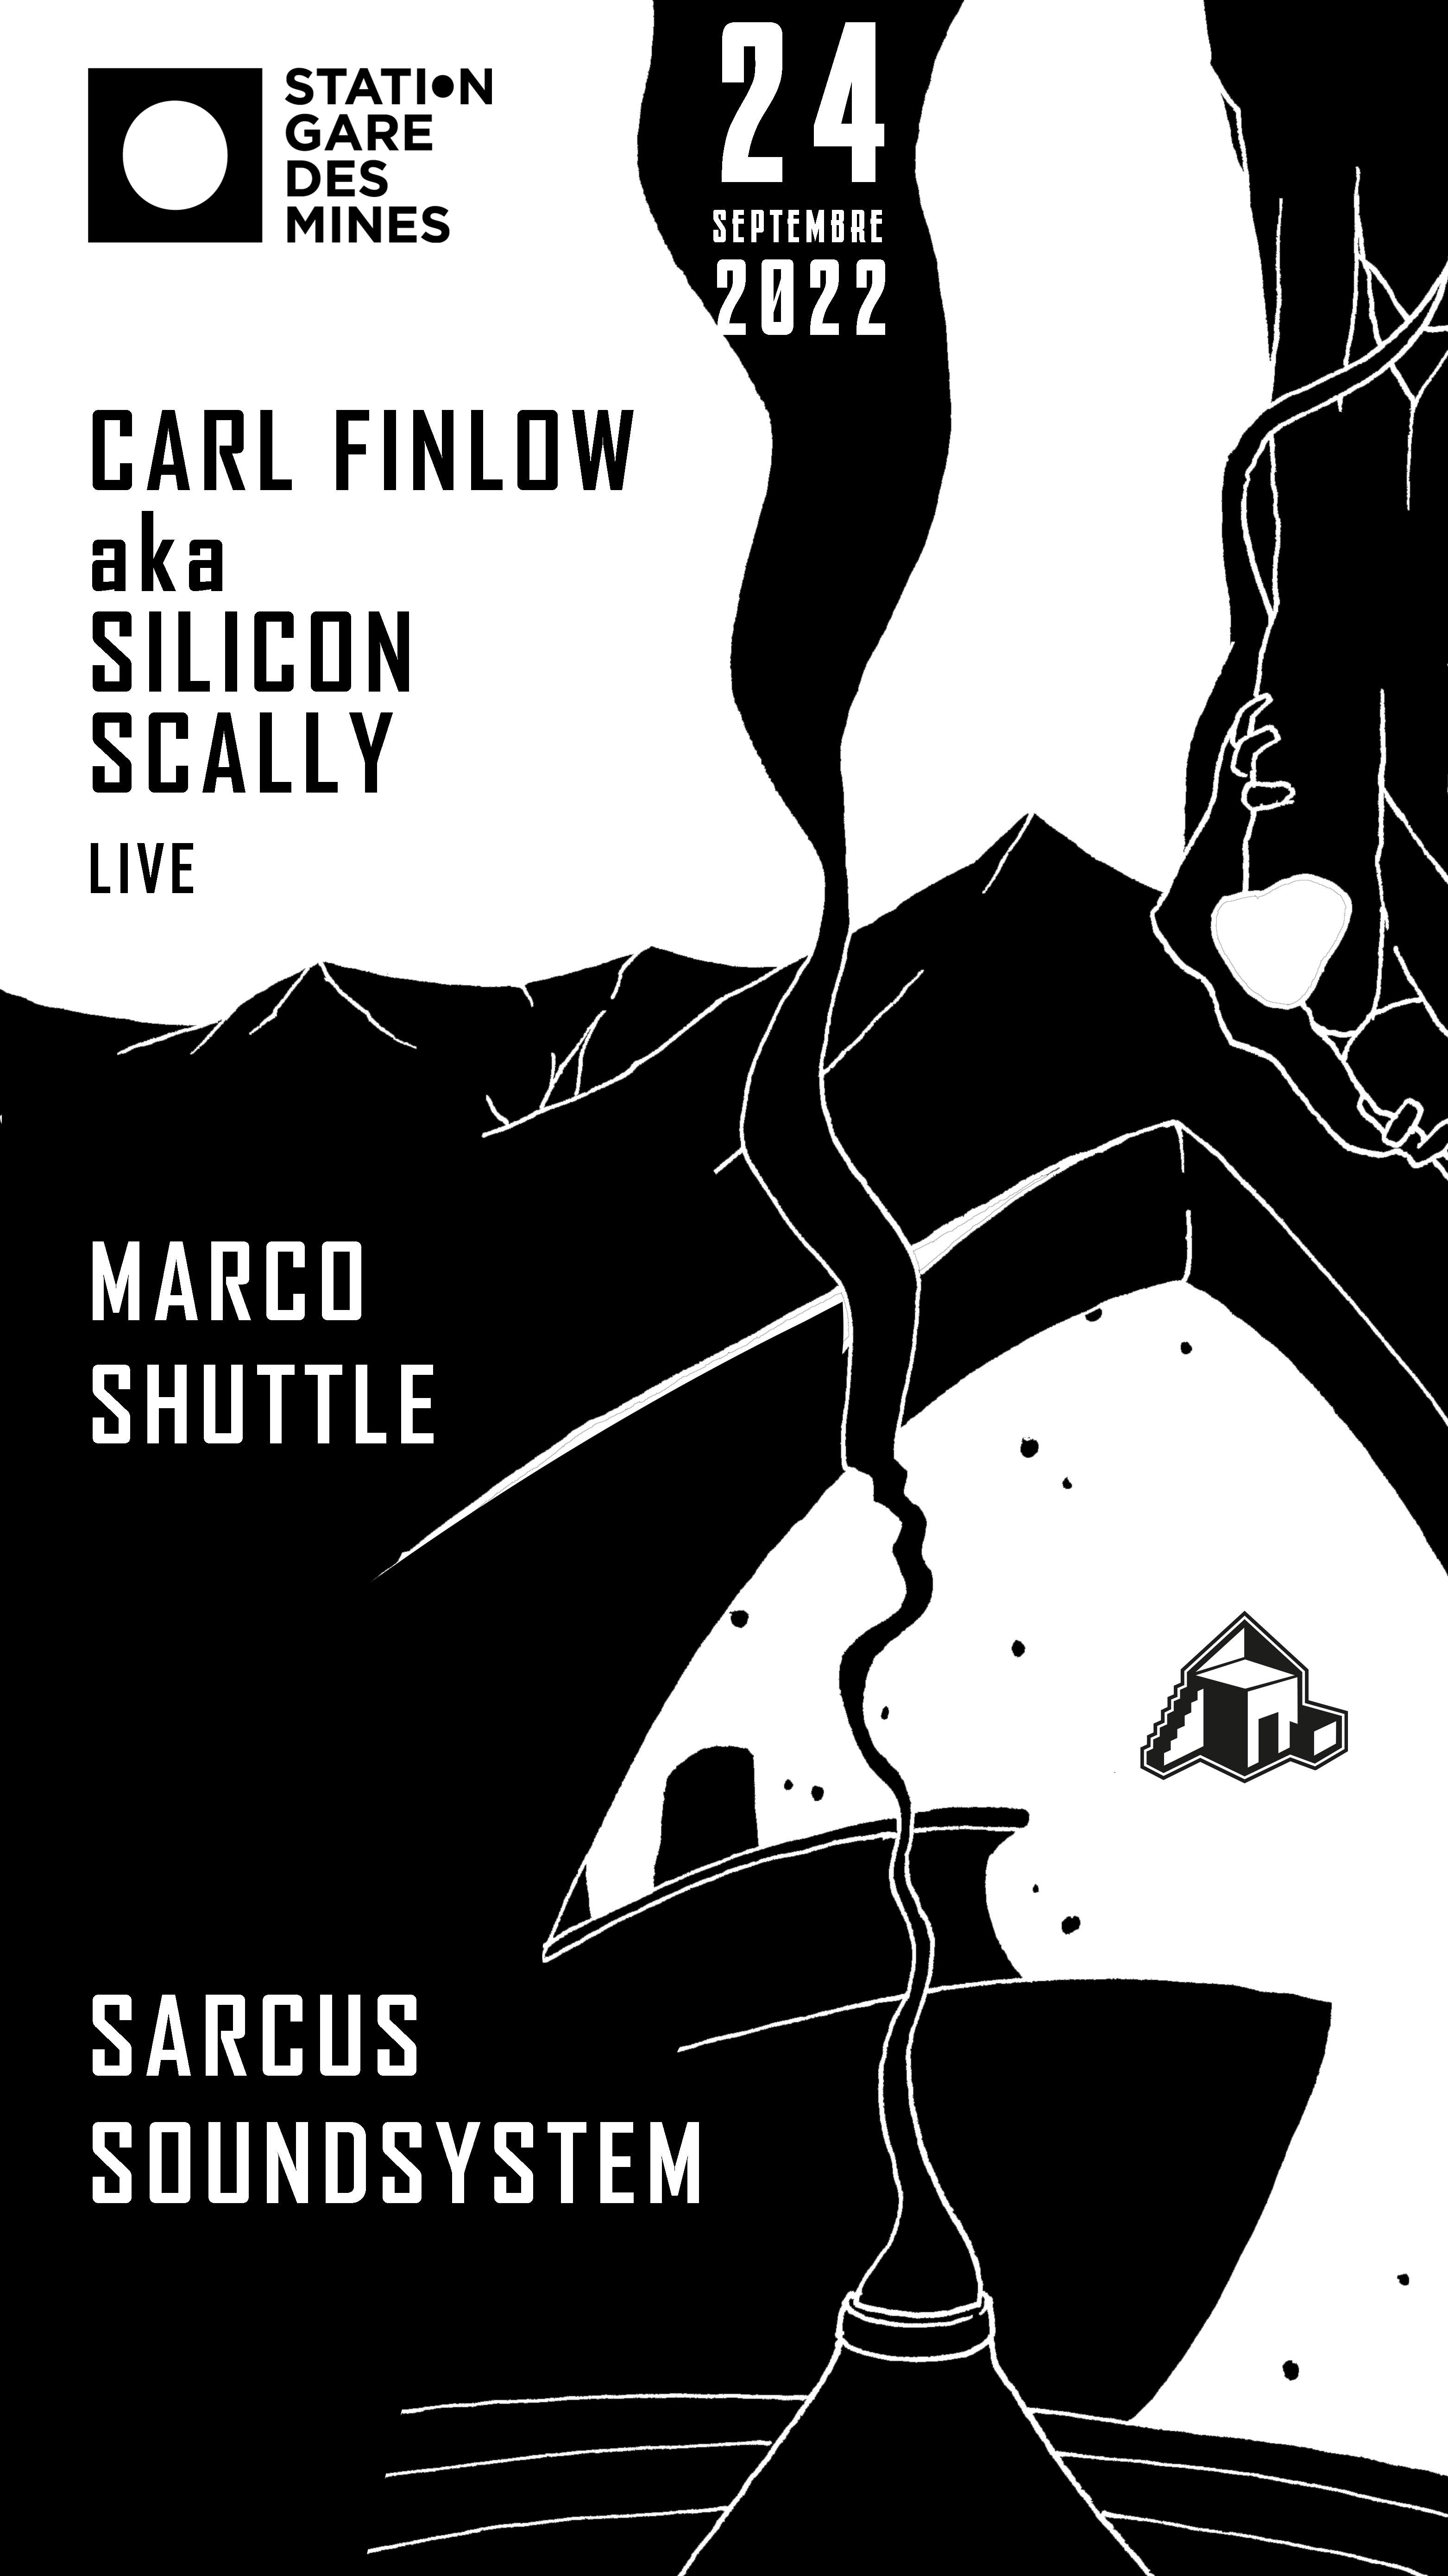 Closing Sarcus Festival 2022 -  Marco Shuttle, Carl Finlow live, Sarcus Soundsystem - フライヤー表